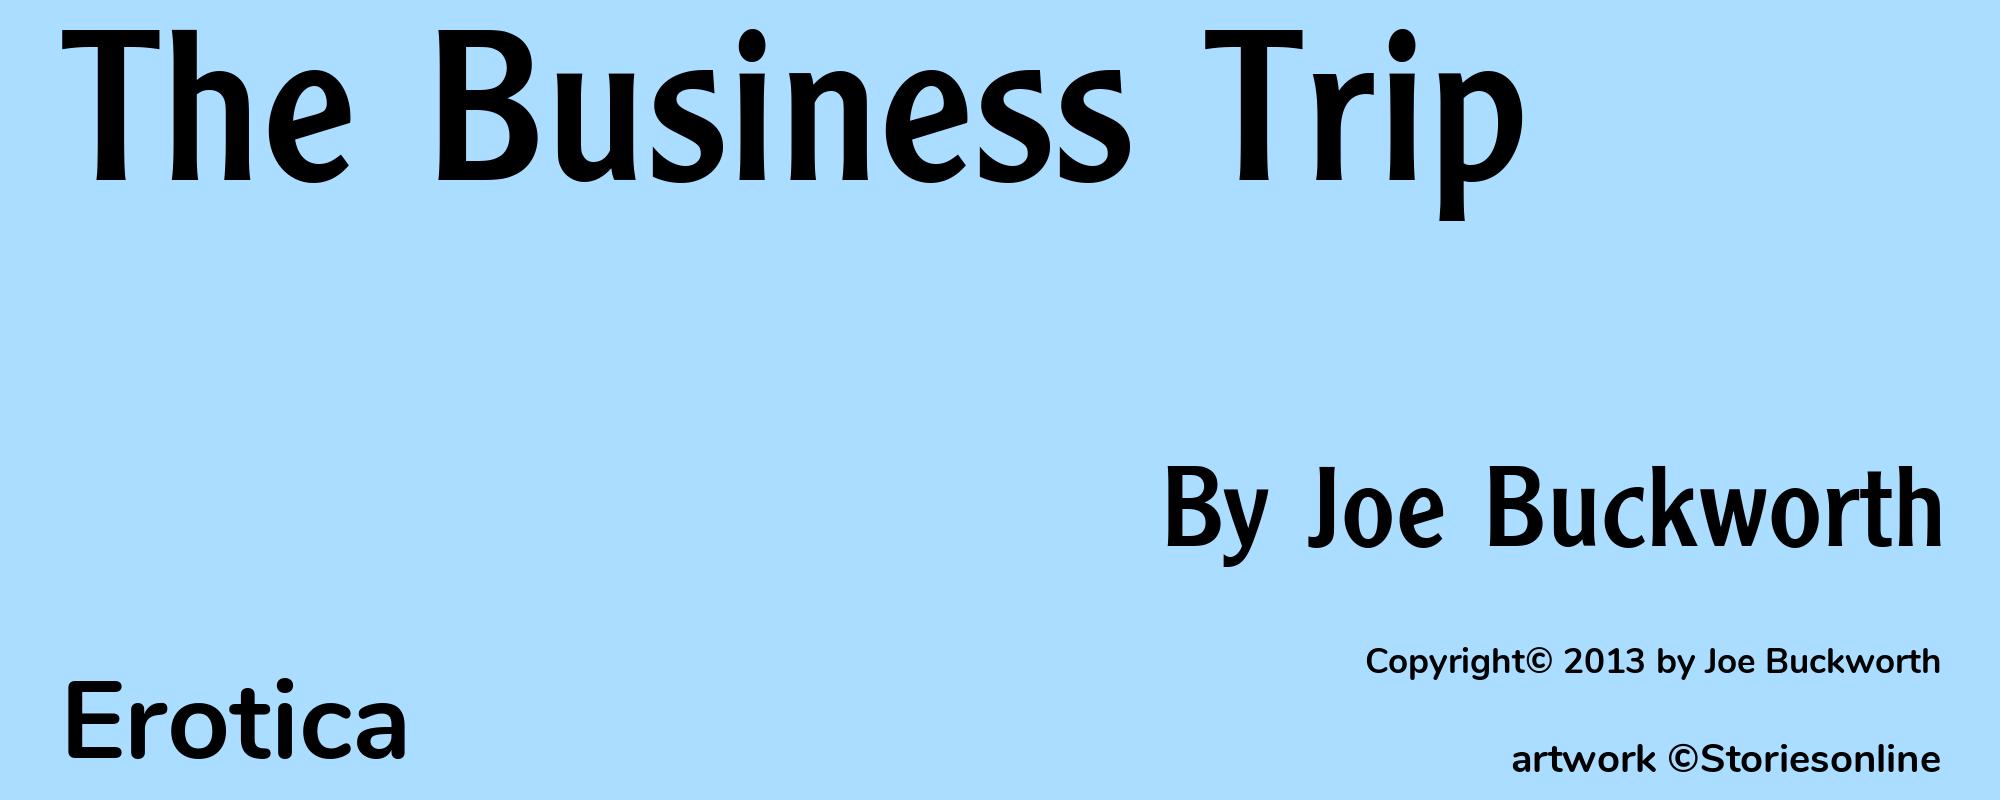 The Business Trip - Cover